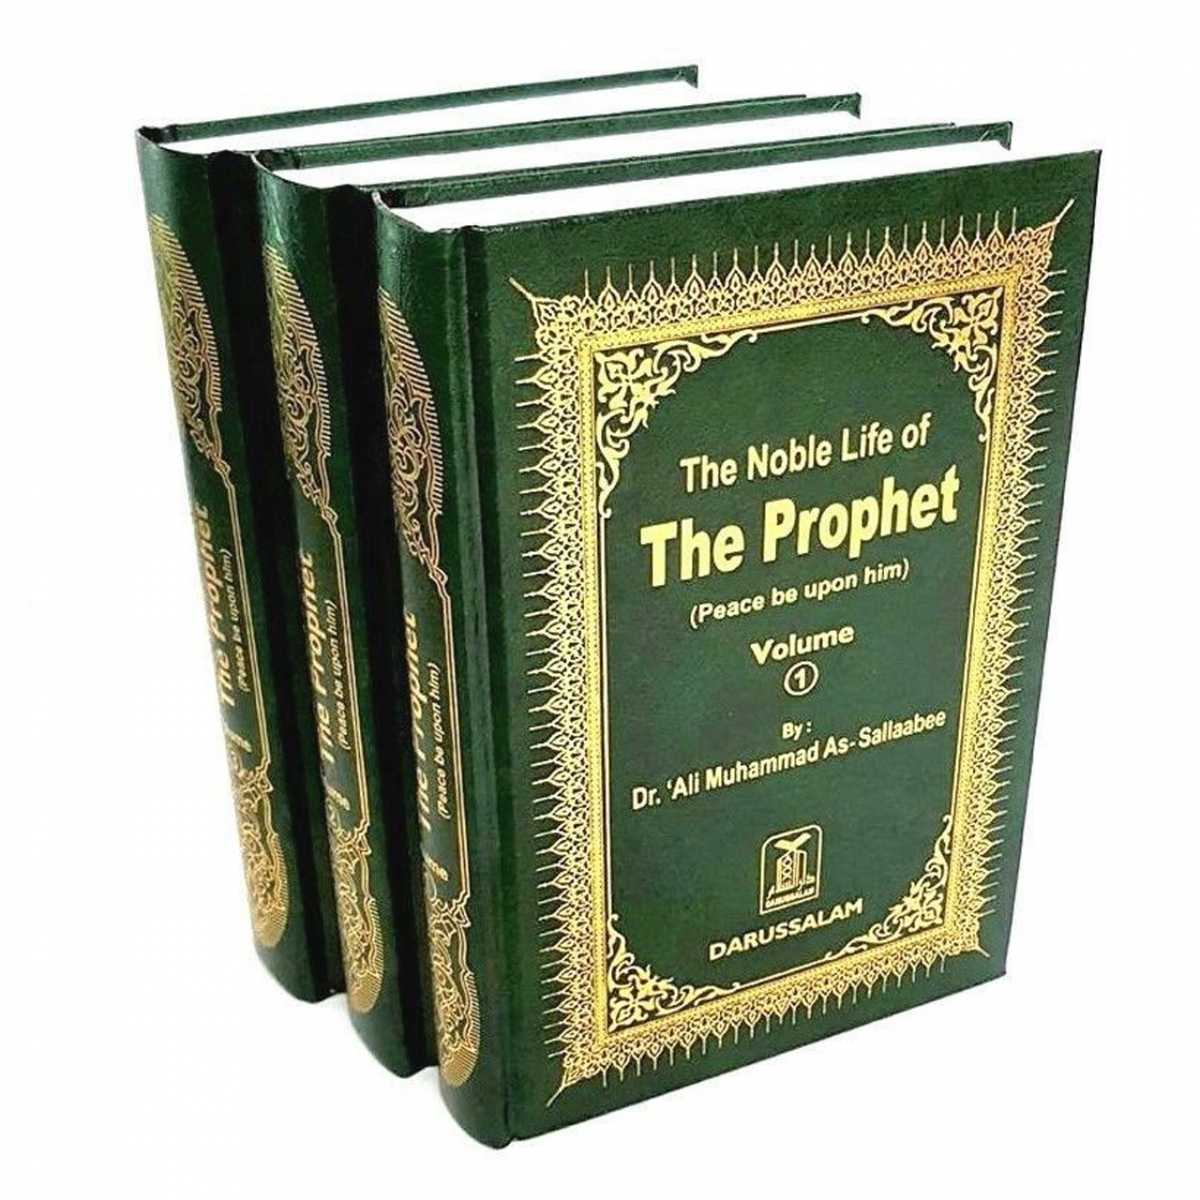 The Noble life of the Prophet (PBUH) 3 Vol set (Darussalam)